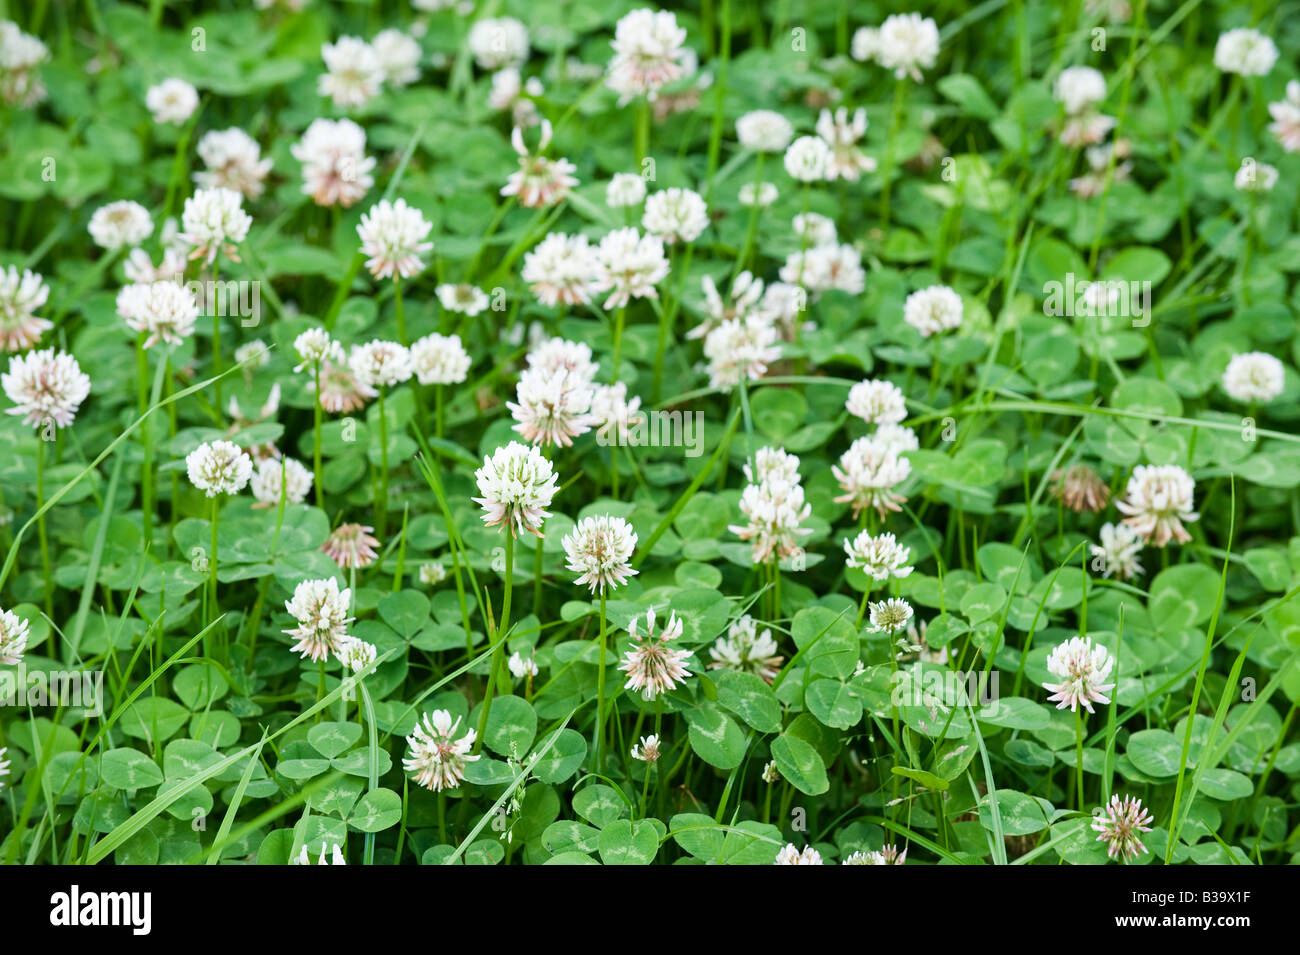 White clover flowering in a grass ley clover mixture Sedbergh Cumbria Stock Photo